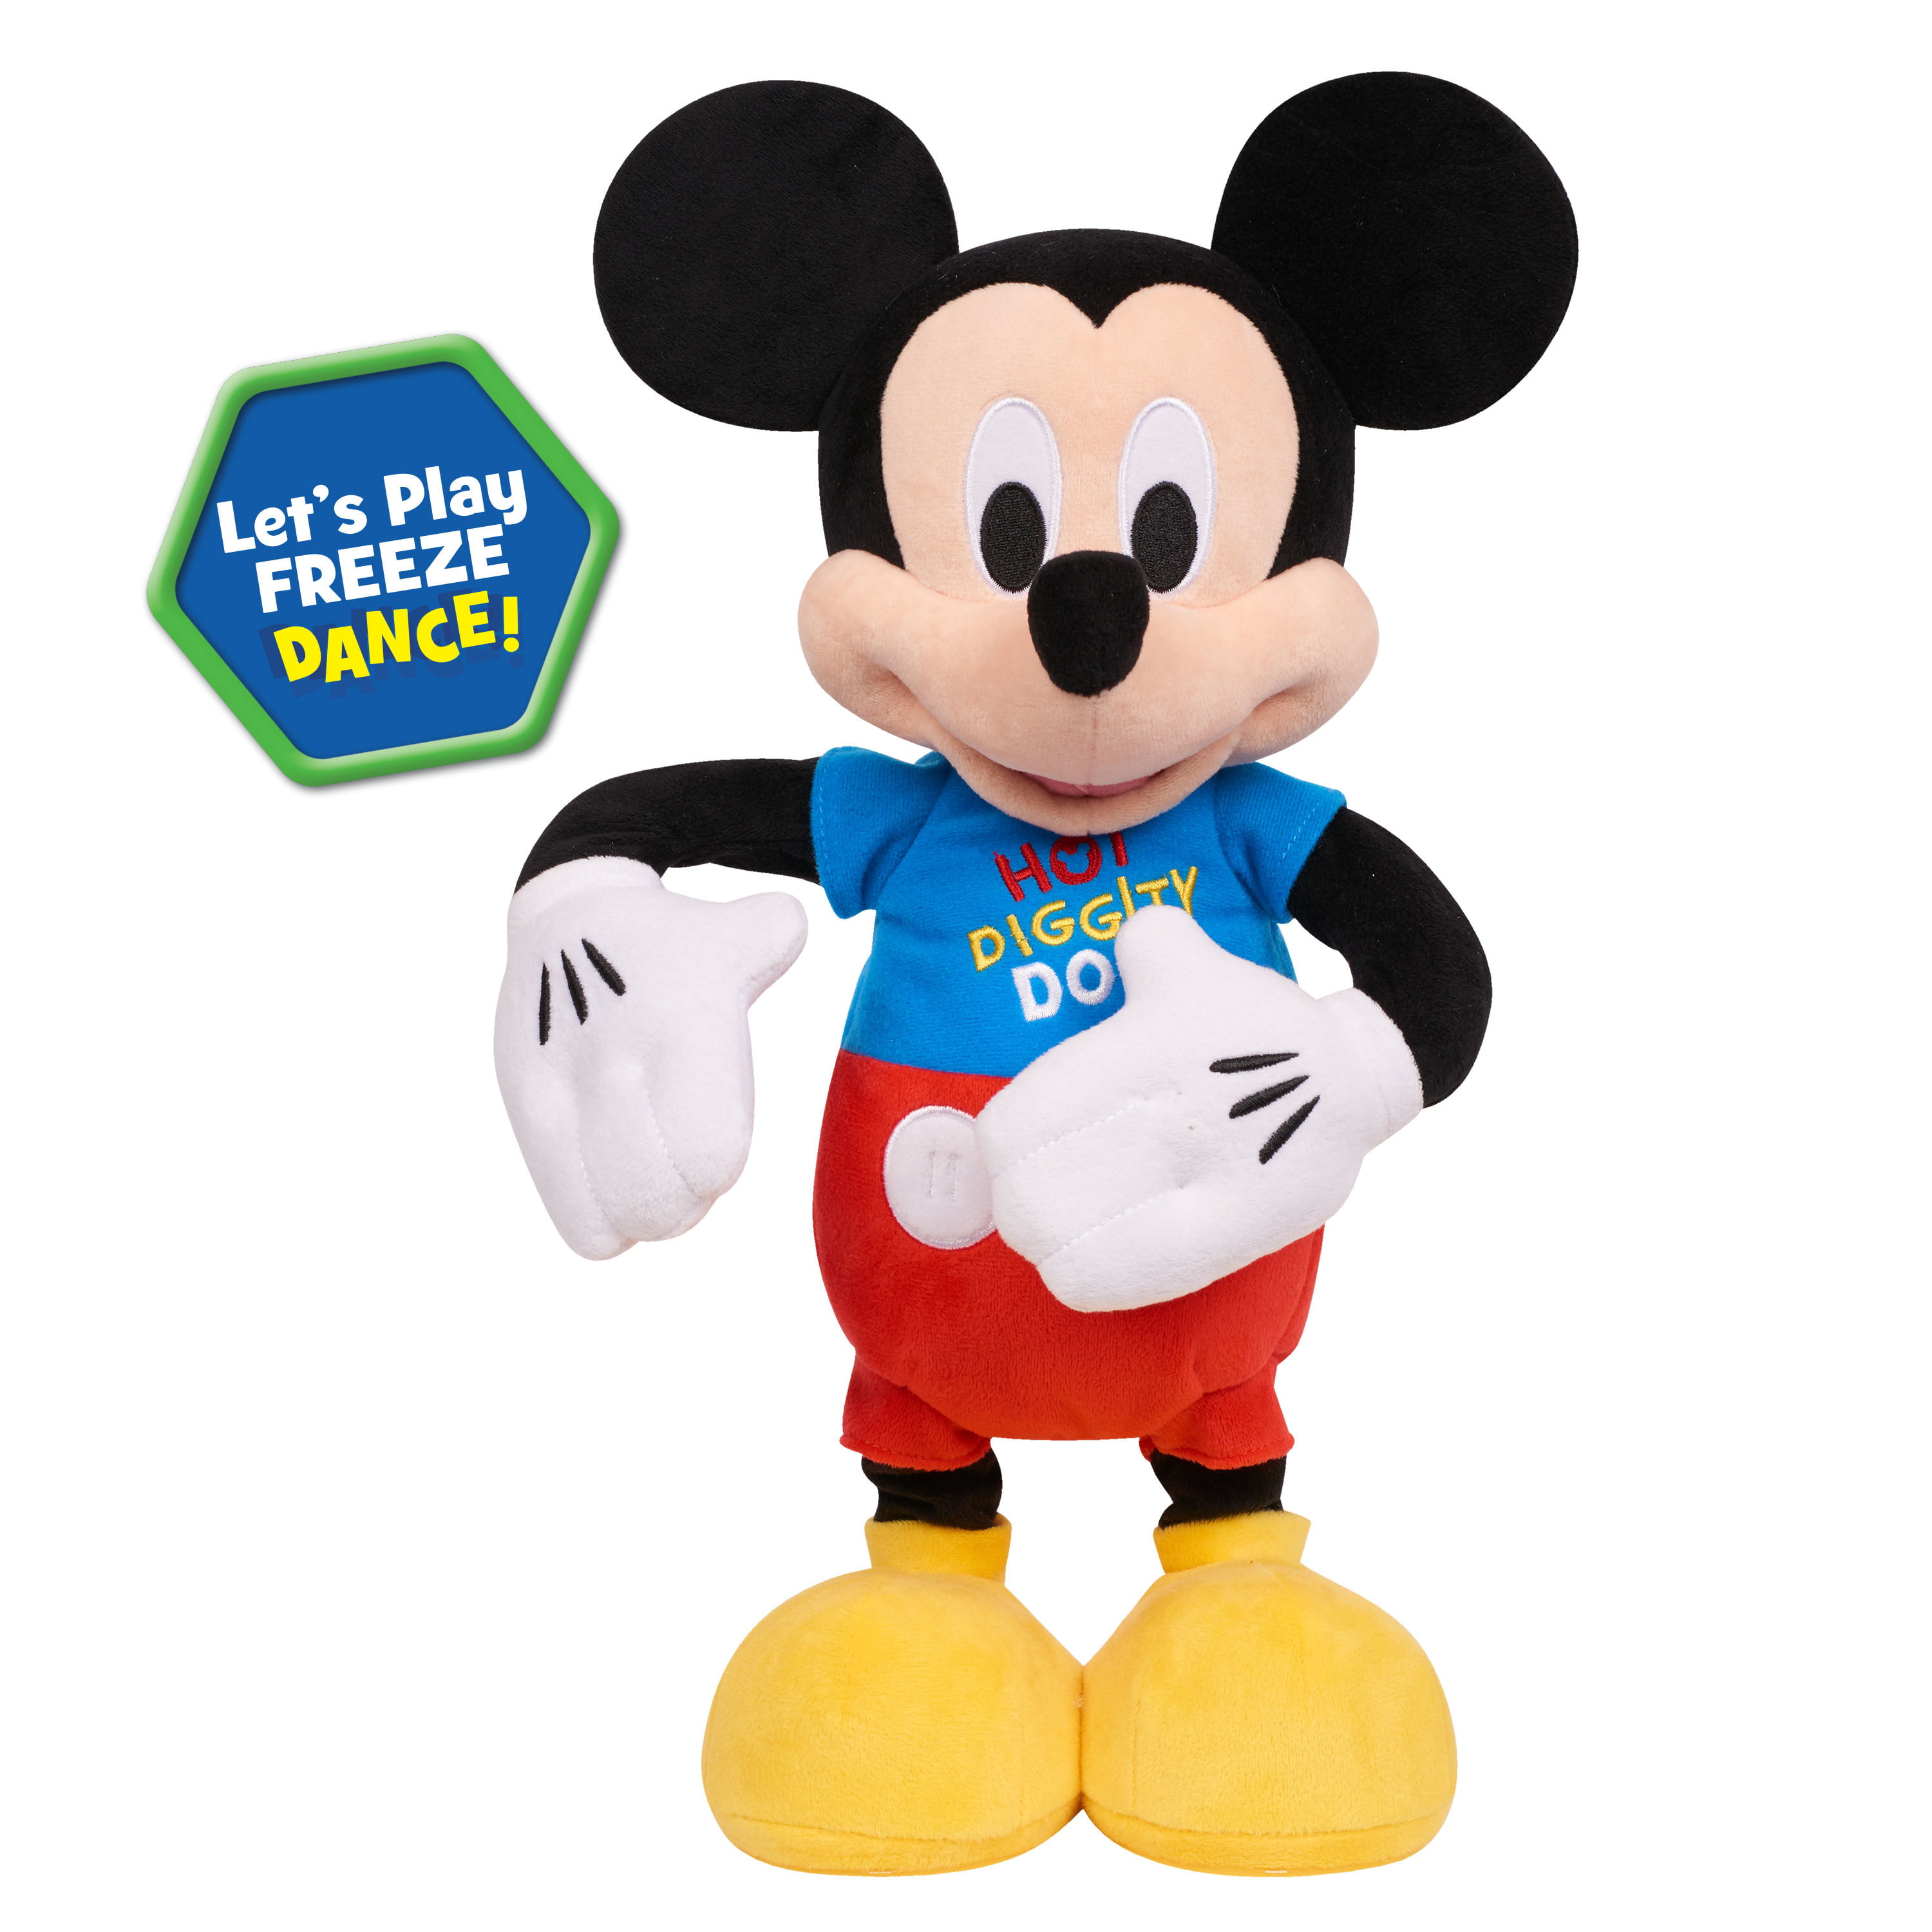 Toys for me toys for you песня. Mickey Mouse Clubhouse Toys. Disney Mickey Mouse Clubhouse. Микки Маус Club House игрушки. Игрушка Mickey Mouse Clubhouse светофор.